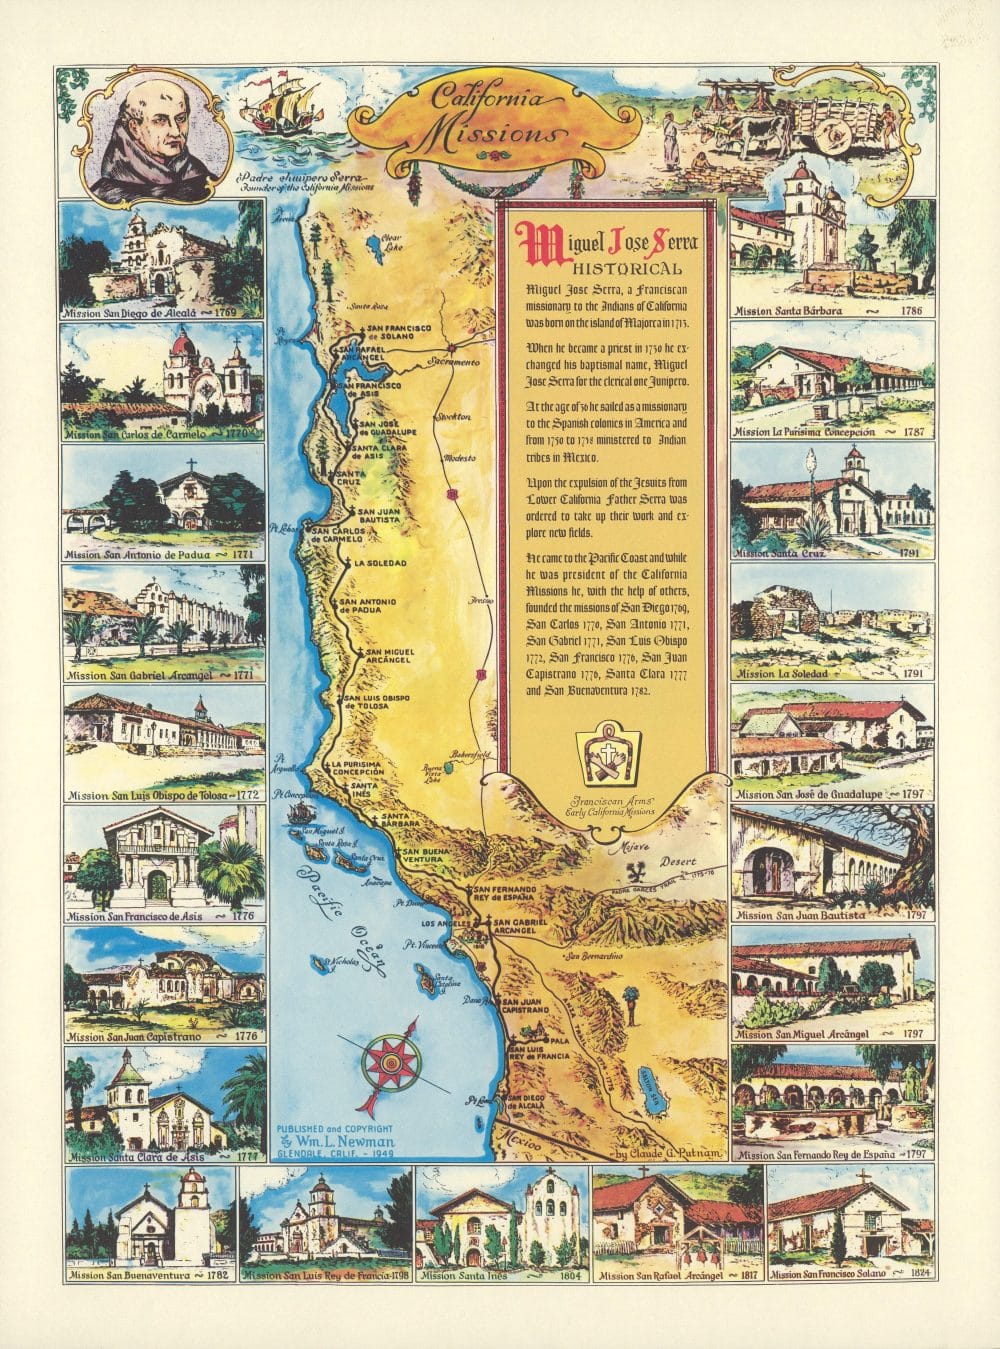 California Missions by Claude G. Putnam